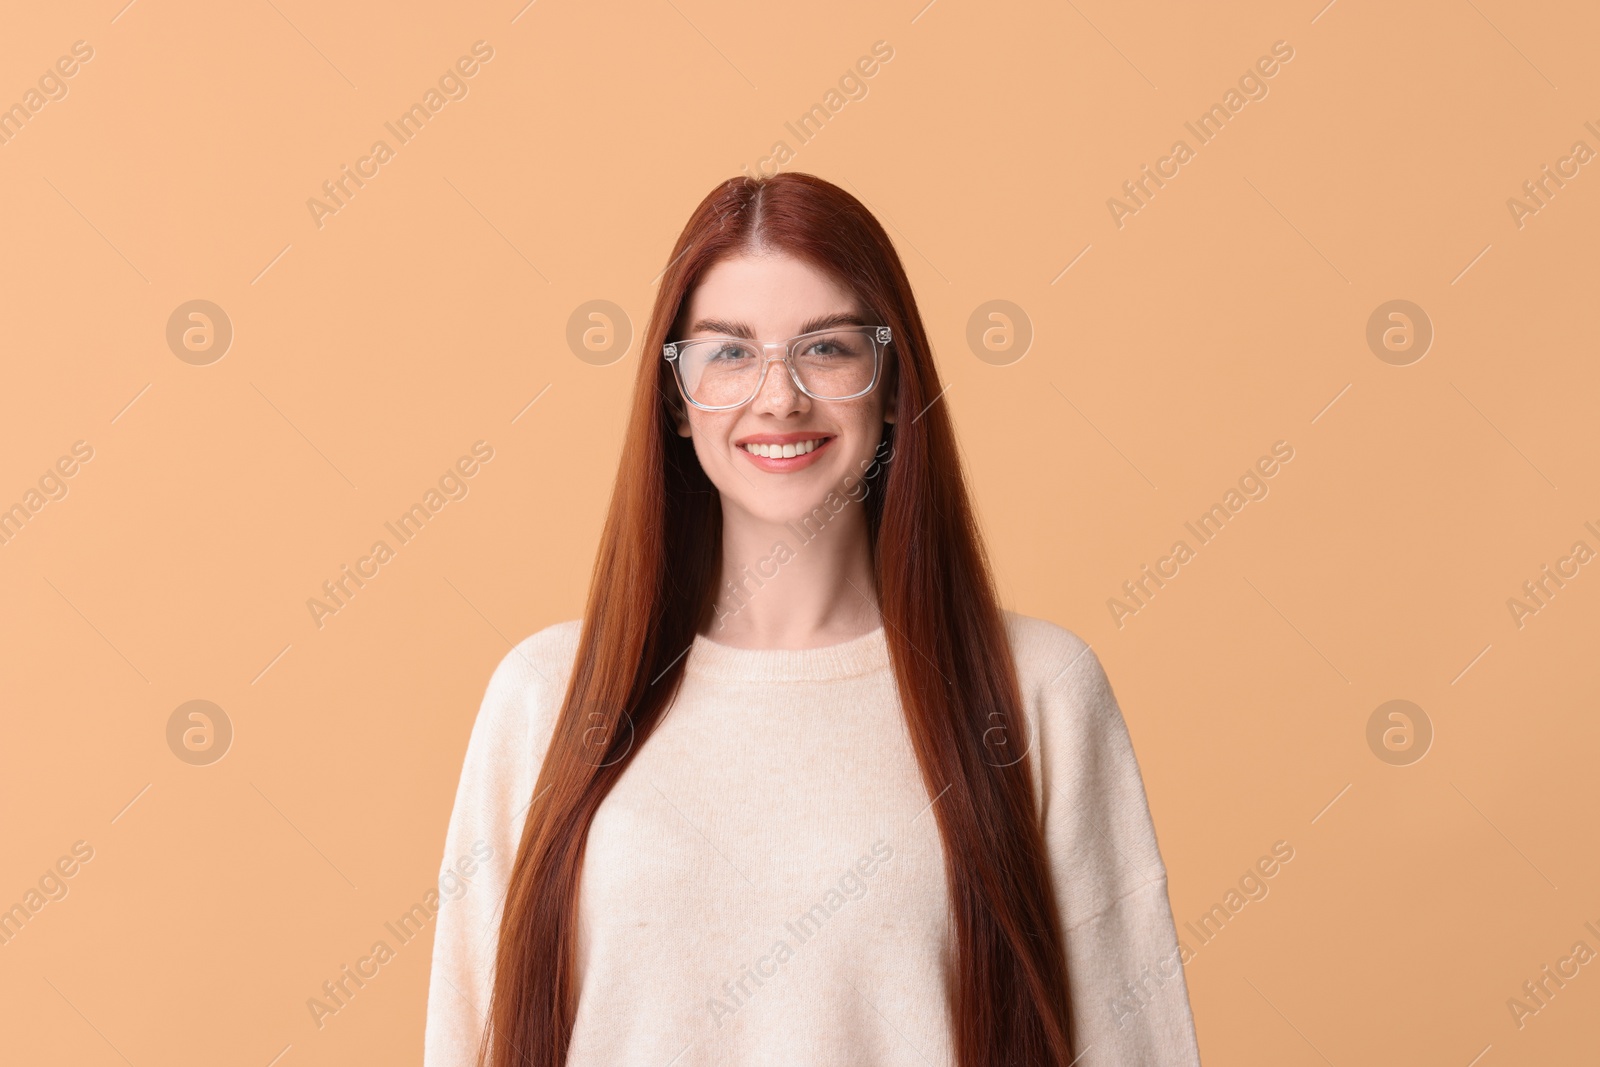 Photo of Portrait of smiling woman in glasses on beige background